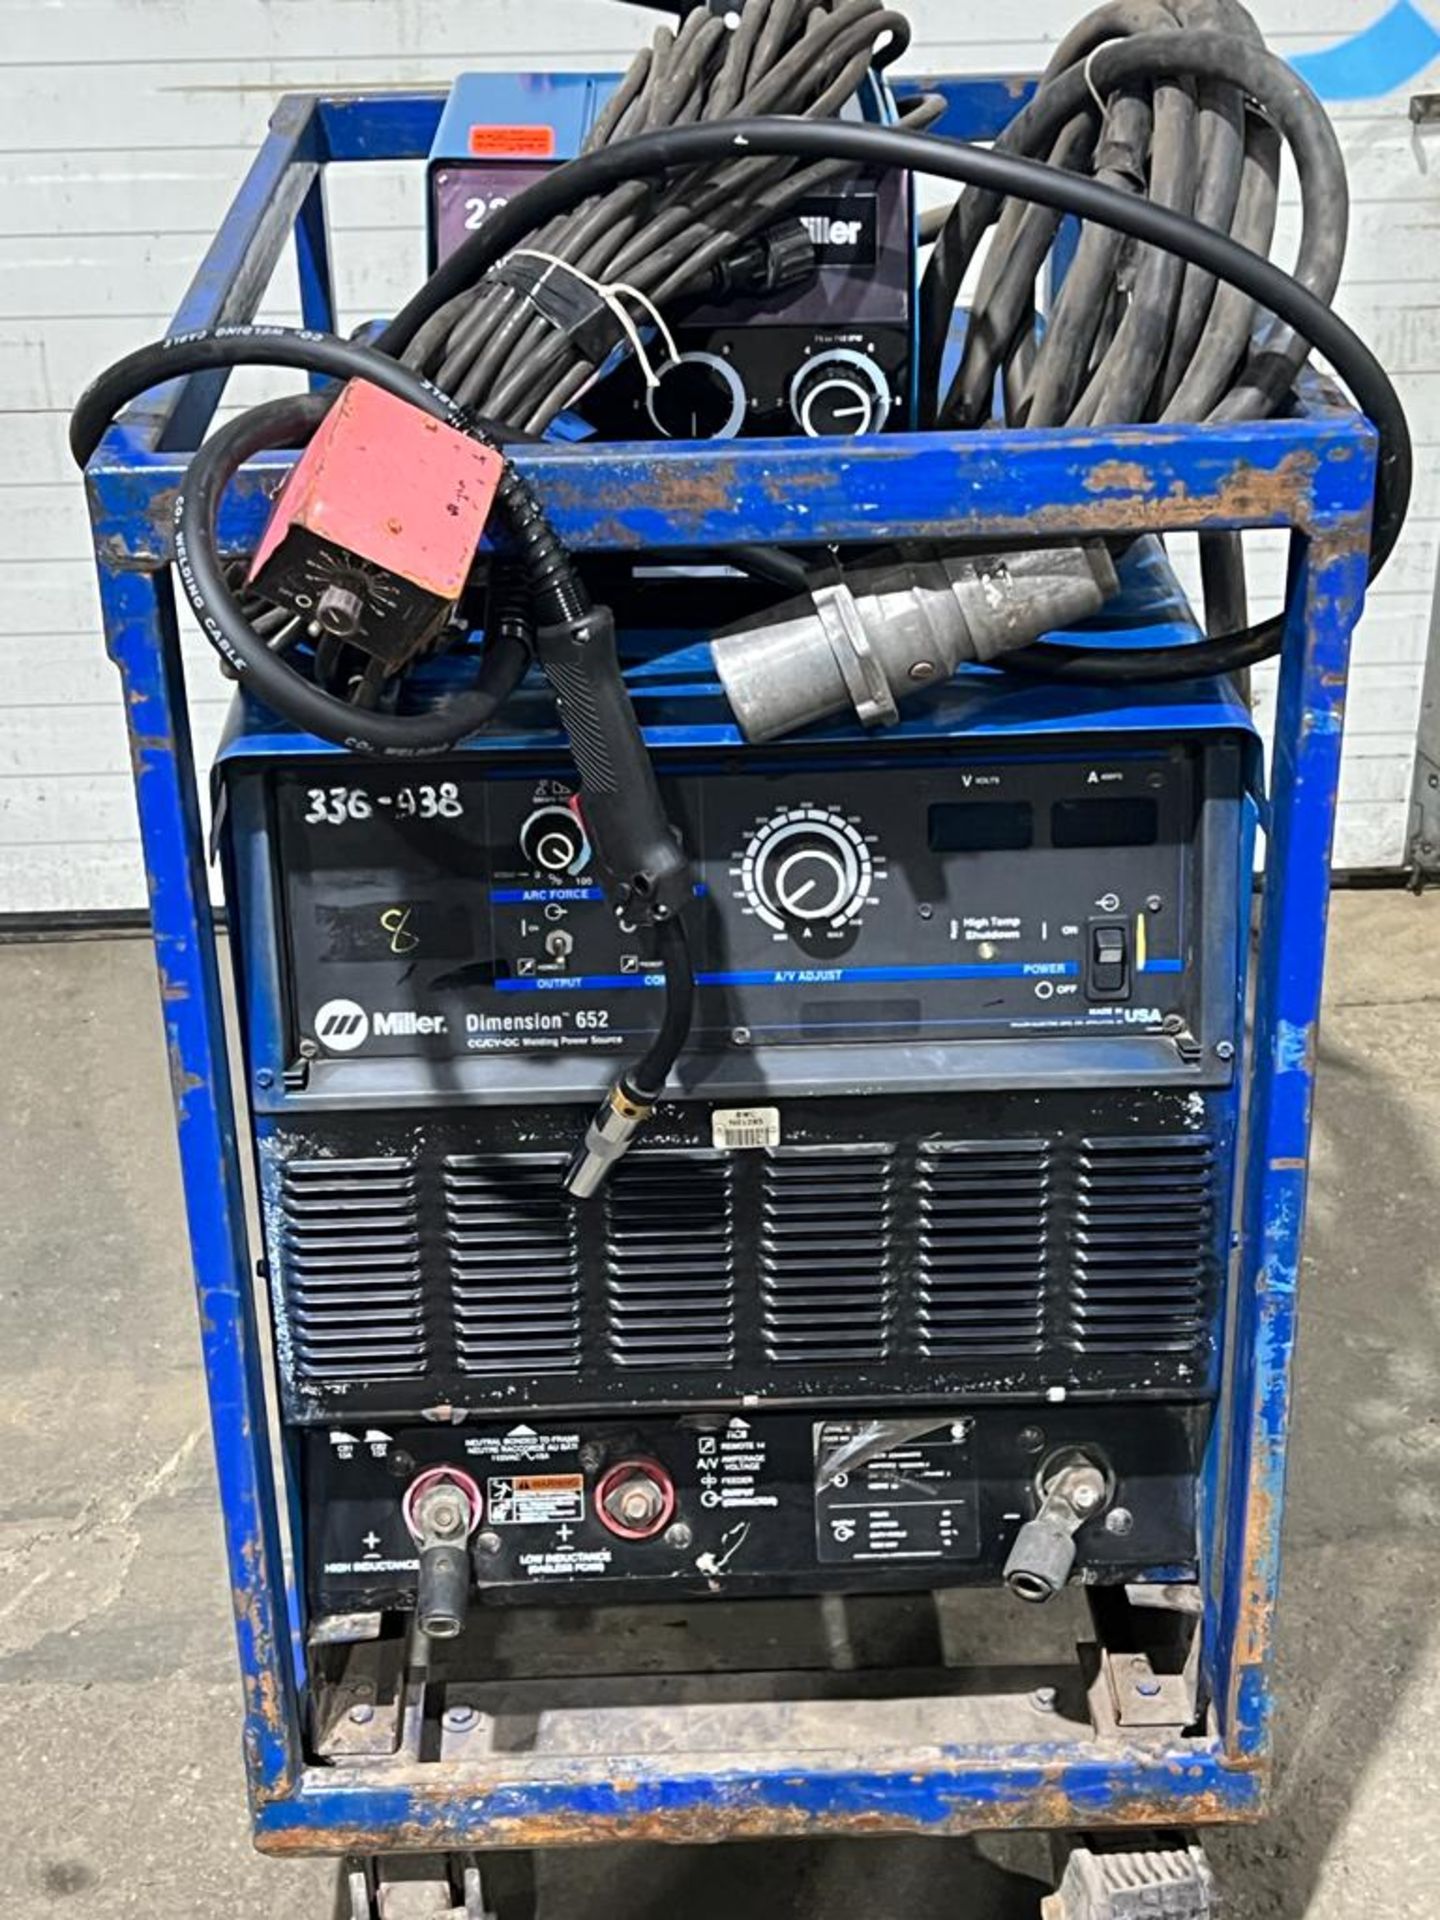 Miller Dimension 652 Mig Welder 650 Amp Mig Tig Stick Multi-Process Power Source with New Wire - Image 3 of 3